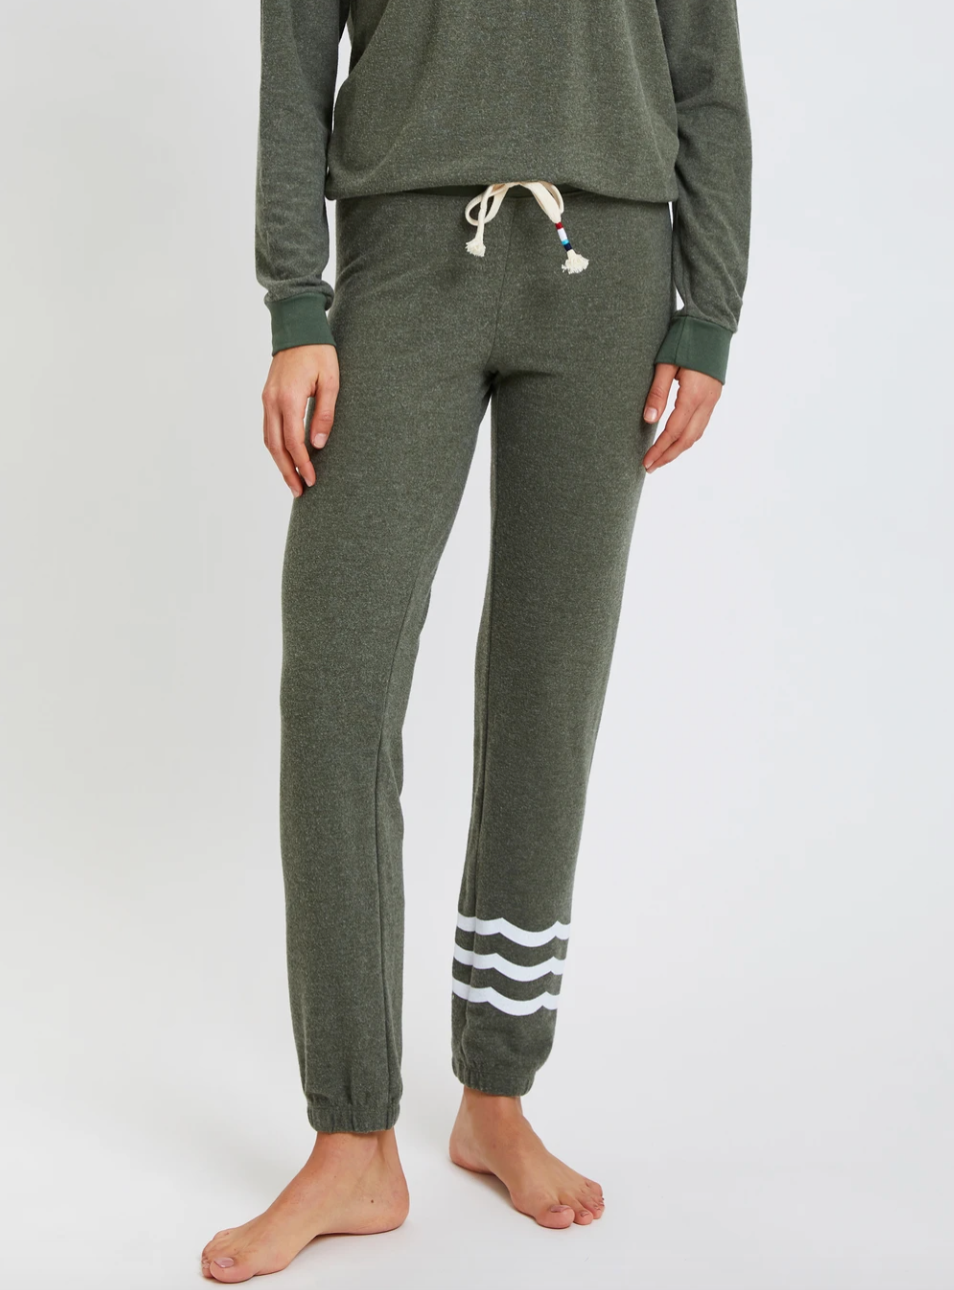 Sol Angeles Essential Hacci Jogger in Olive - FINAL SALE